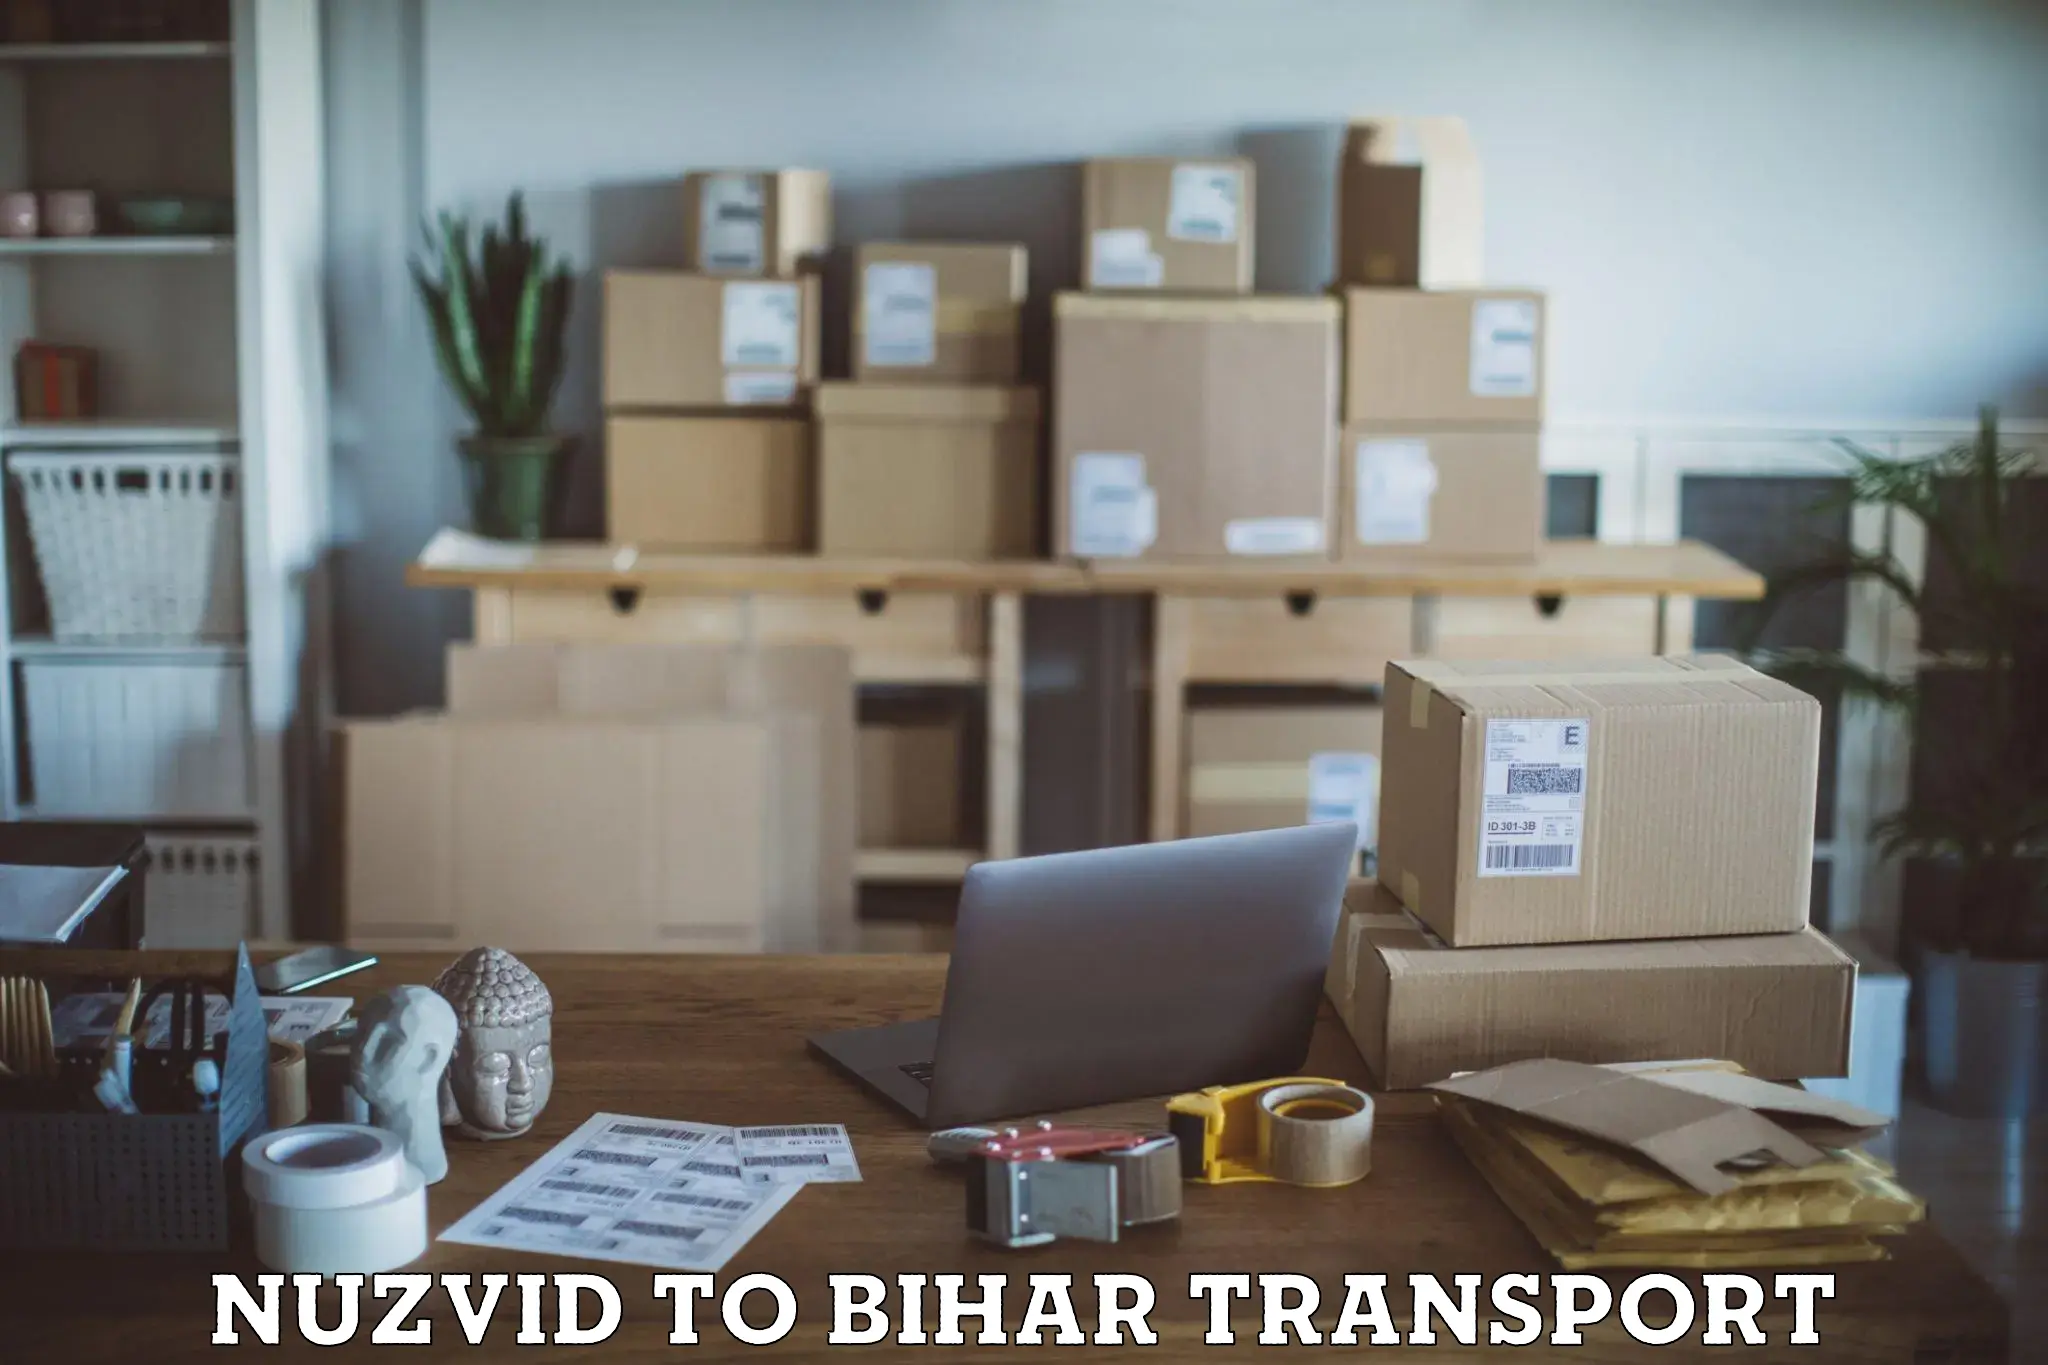 Express transport services in Nuzvid to Bhojpur